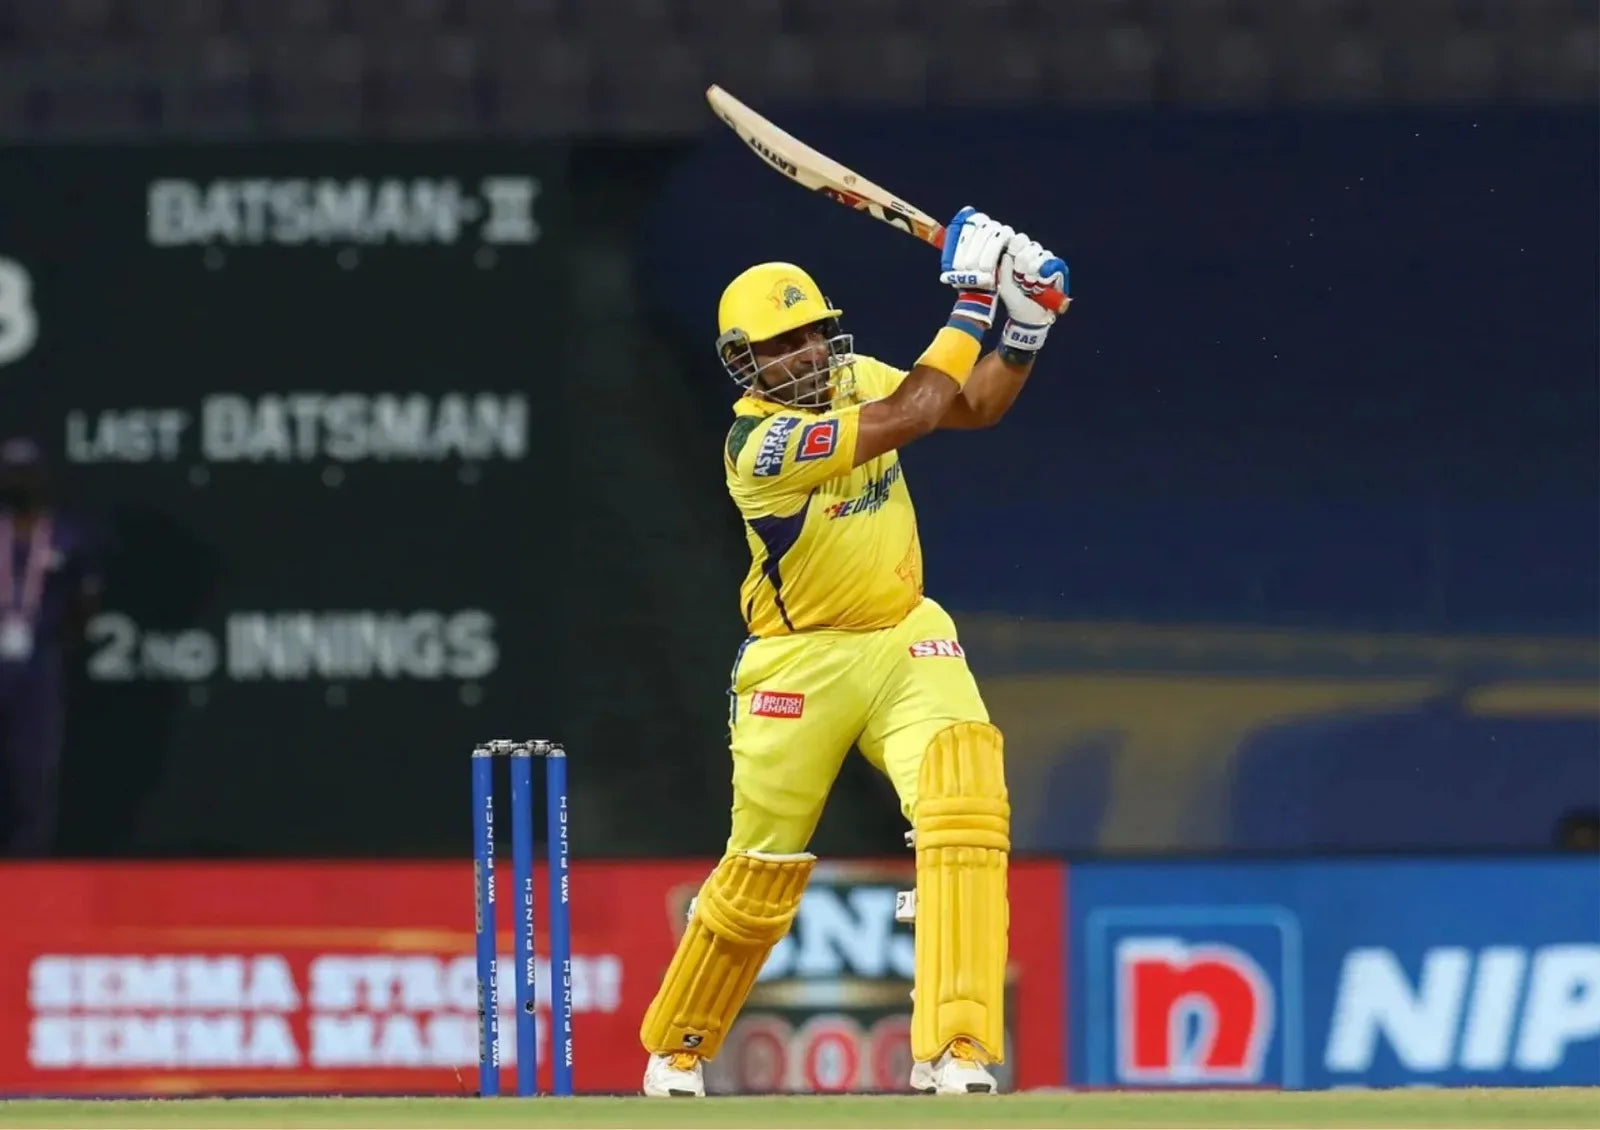 Robin Uthappa Batting for the Chennai Super Kings in the IPL